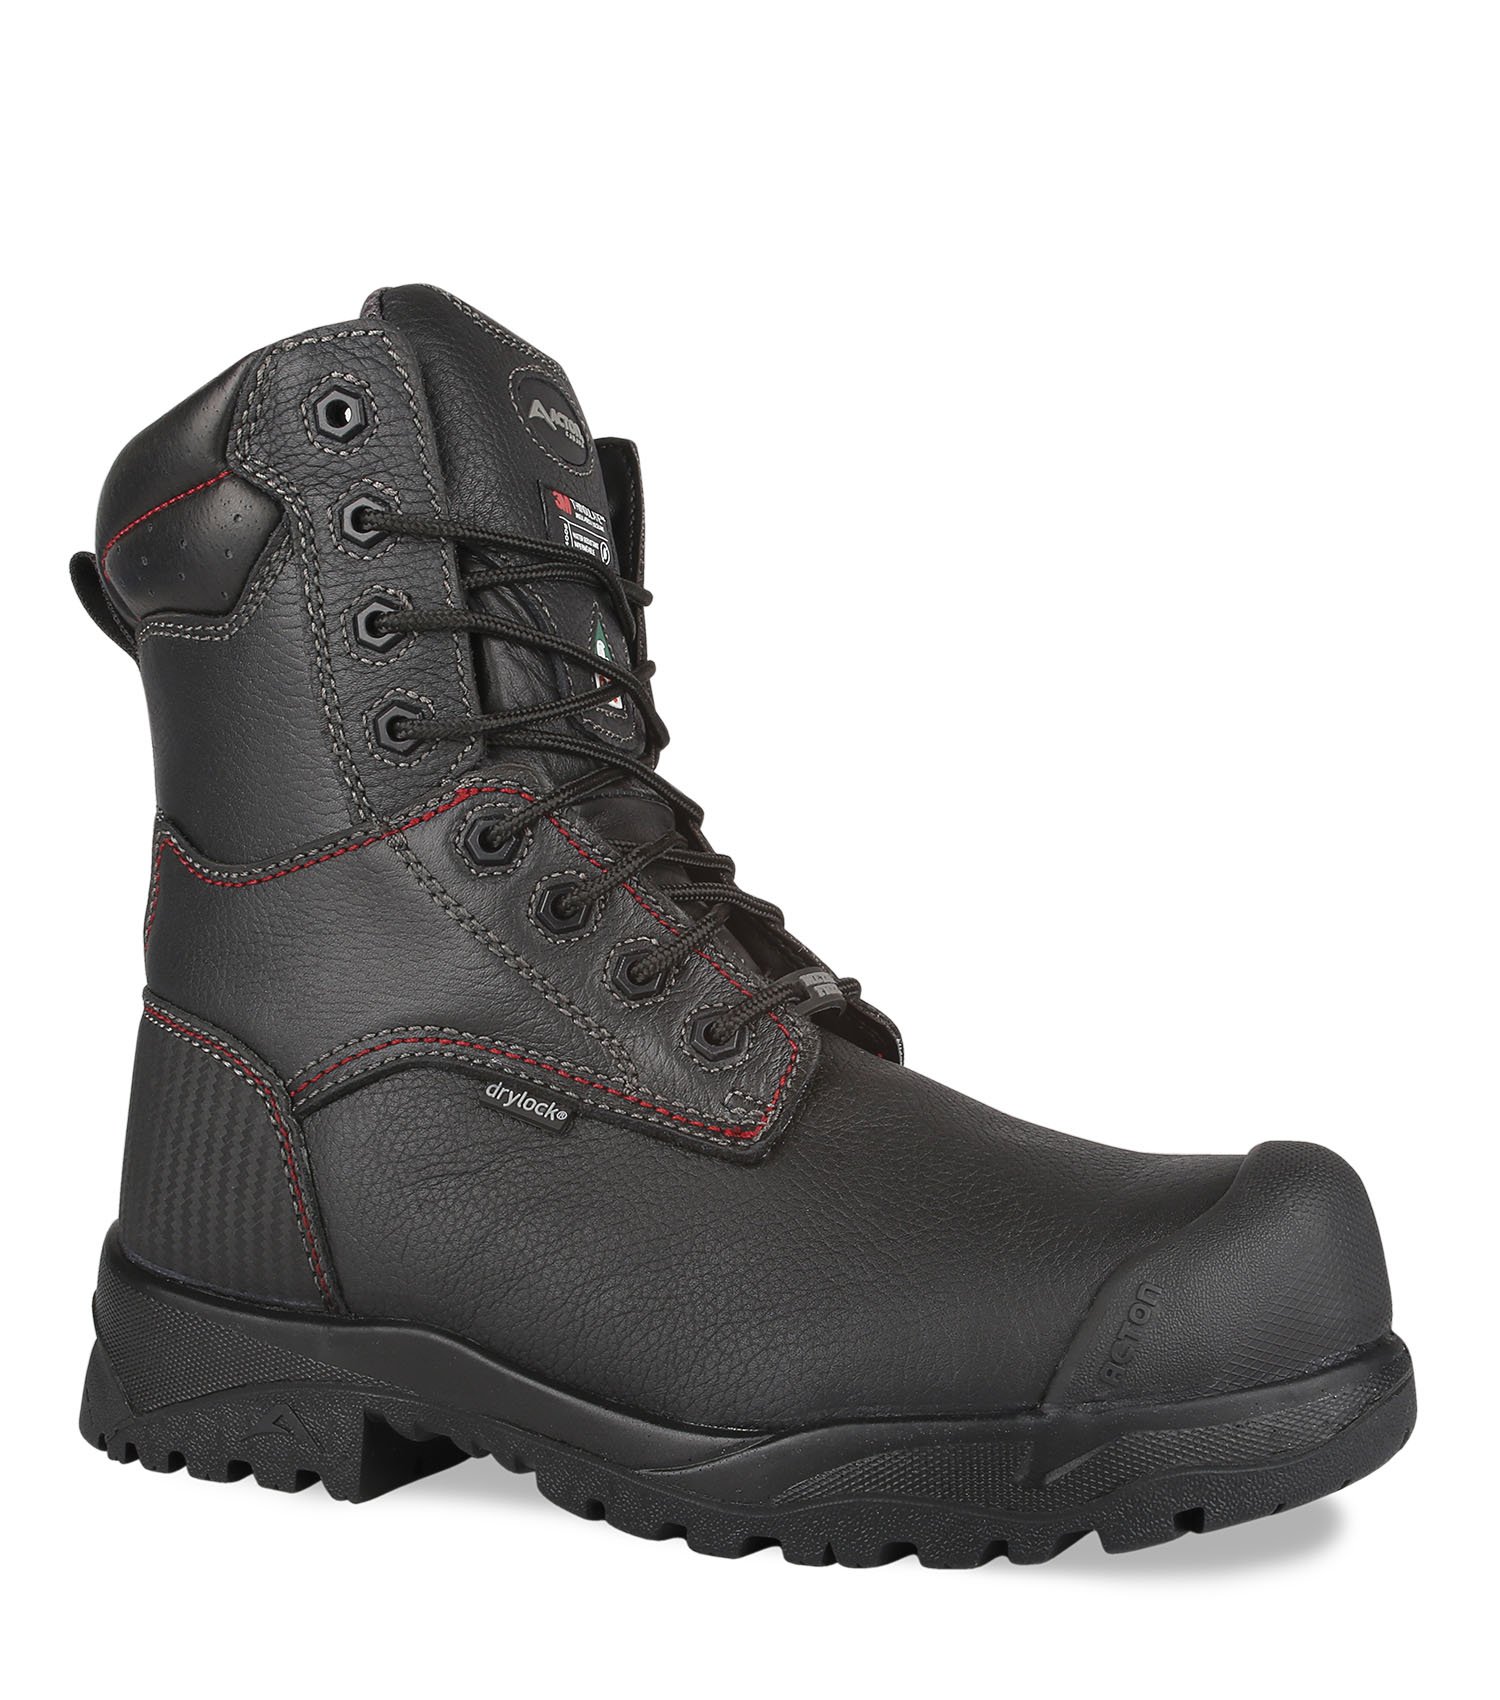 Acton winter work boot A9237-11